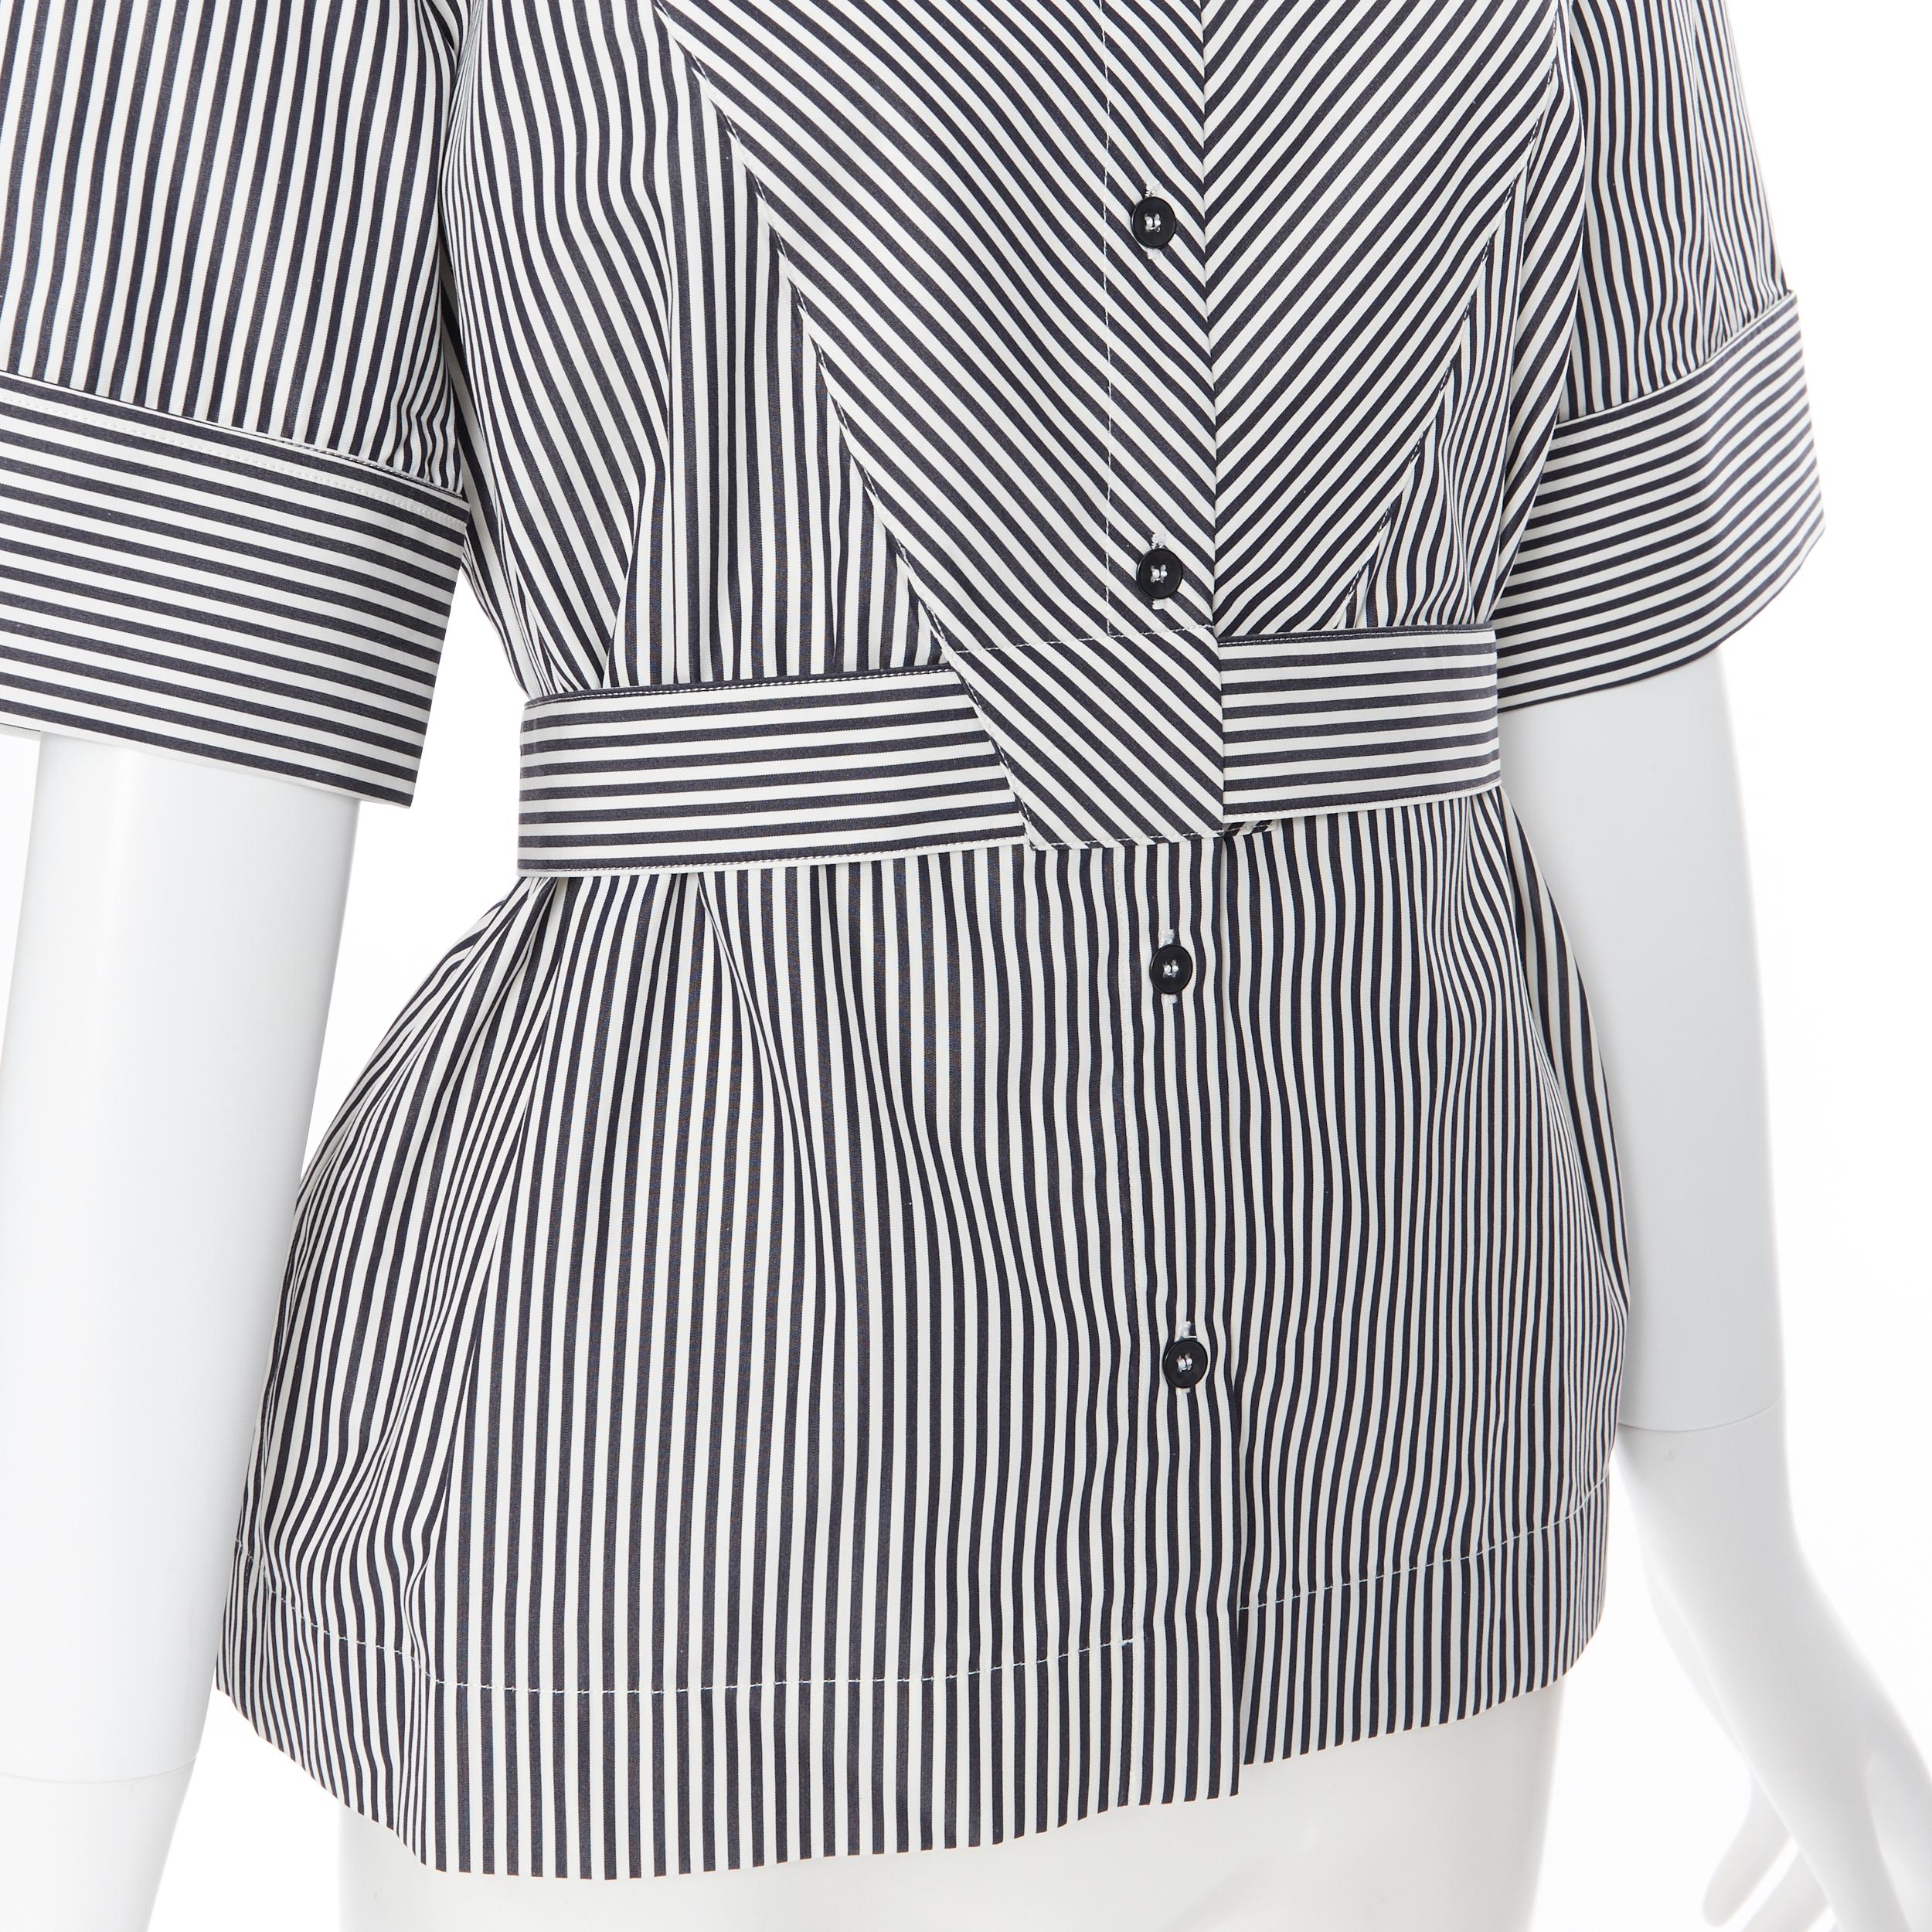 PALMER HARDING 100% cotton navy white contrast stripe cinched waist shirt UK6 XS
Brand: Palmer Harding
Model Name / Style: Cotton shirt
Material: Cotton
Color: Navy, white
Pattern: Striped
Extra Detail: 100% cotton. Navy and white stripe. Attached